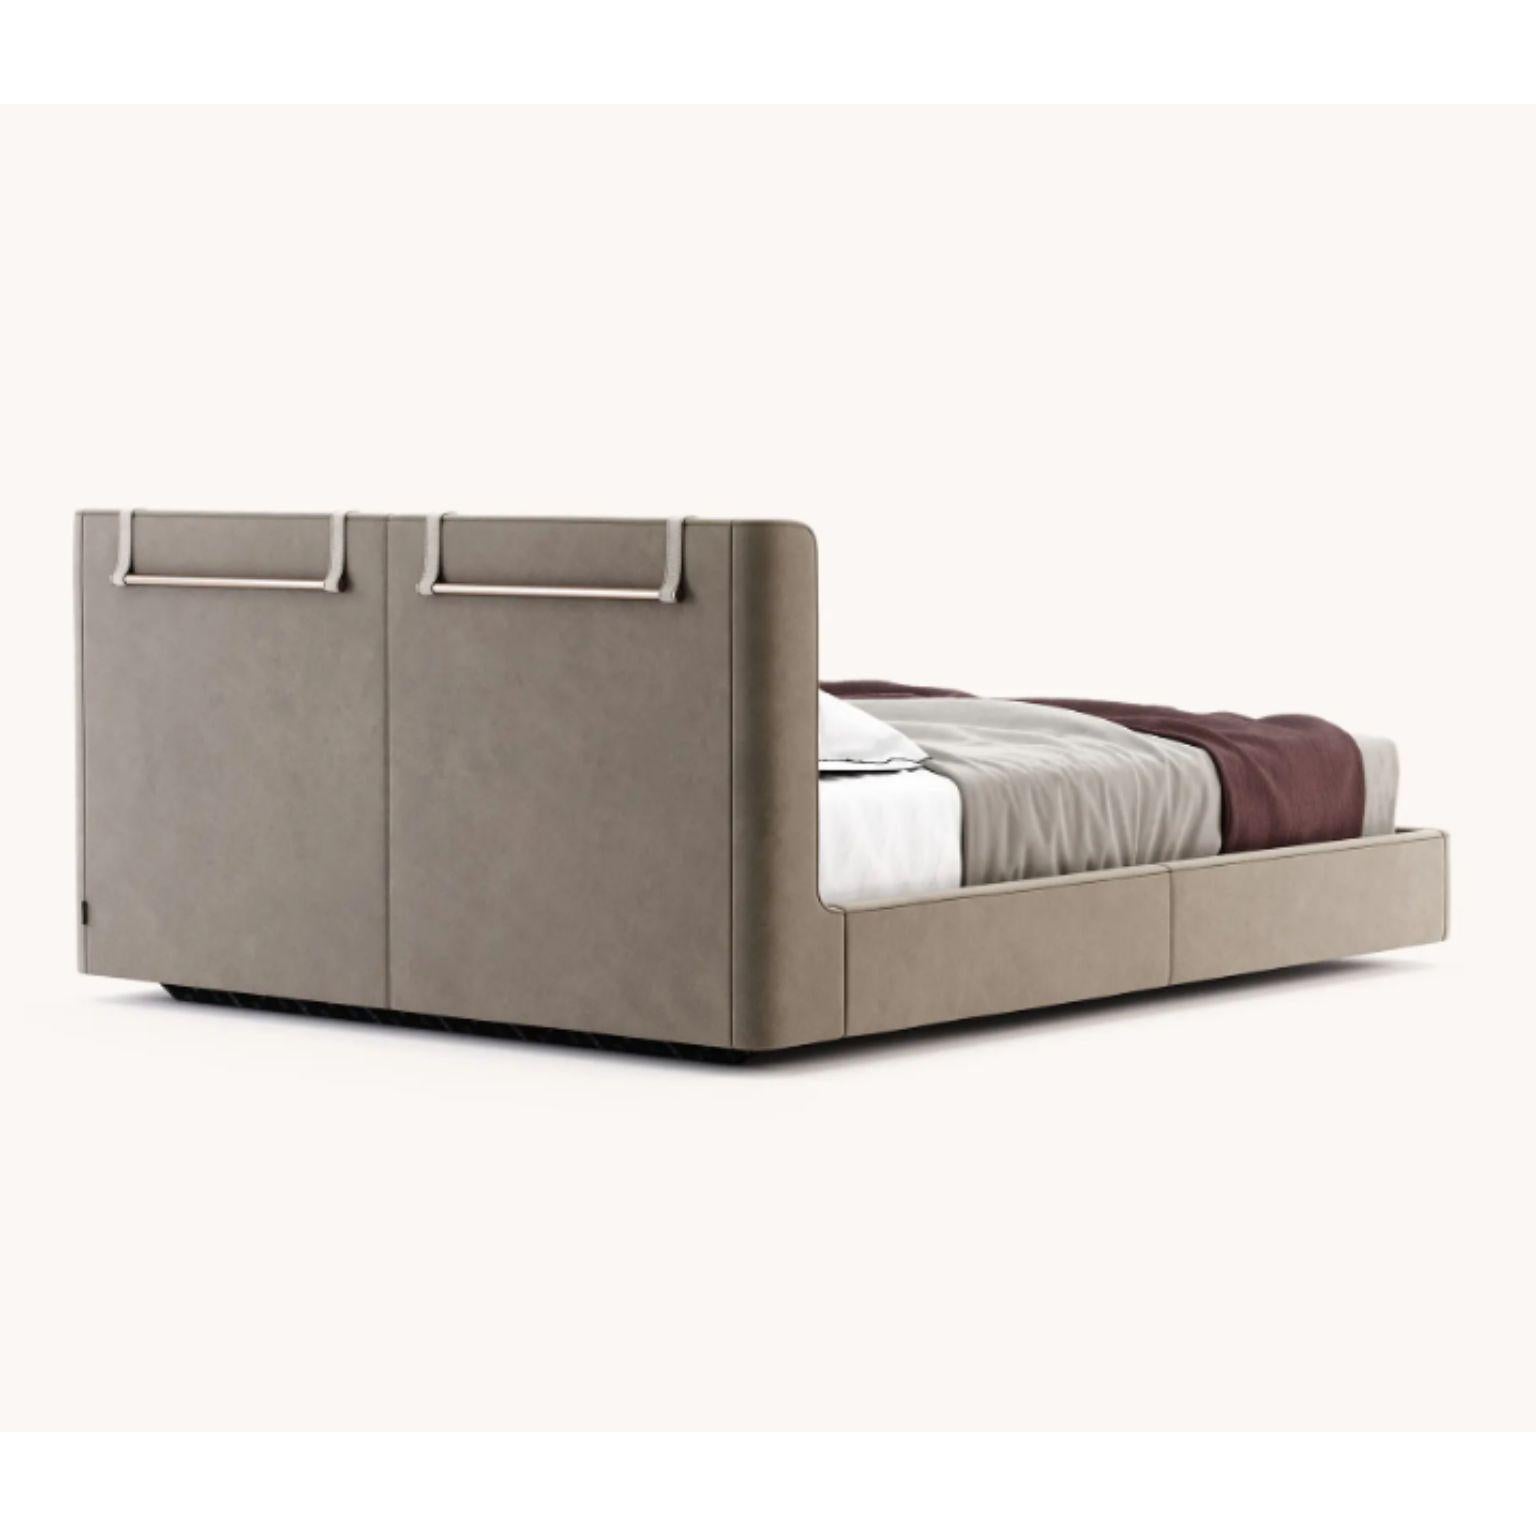 Other King Size Kelsi Bed by Domkapa For Sale